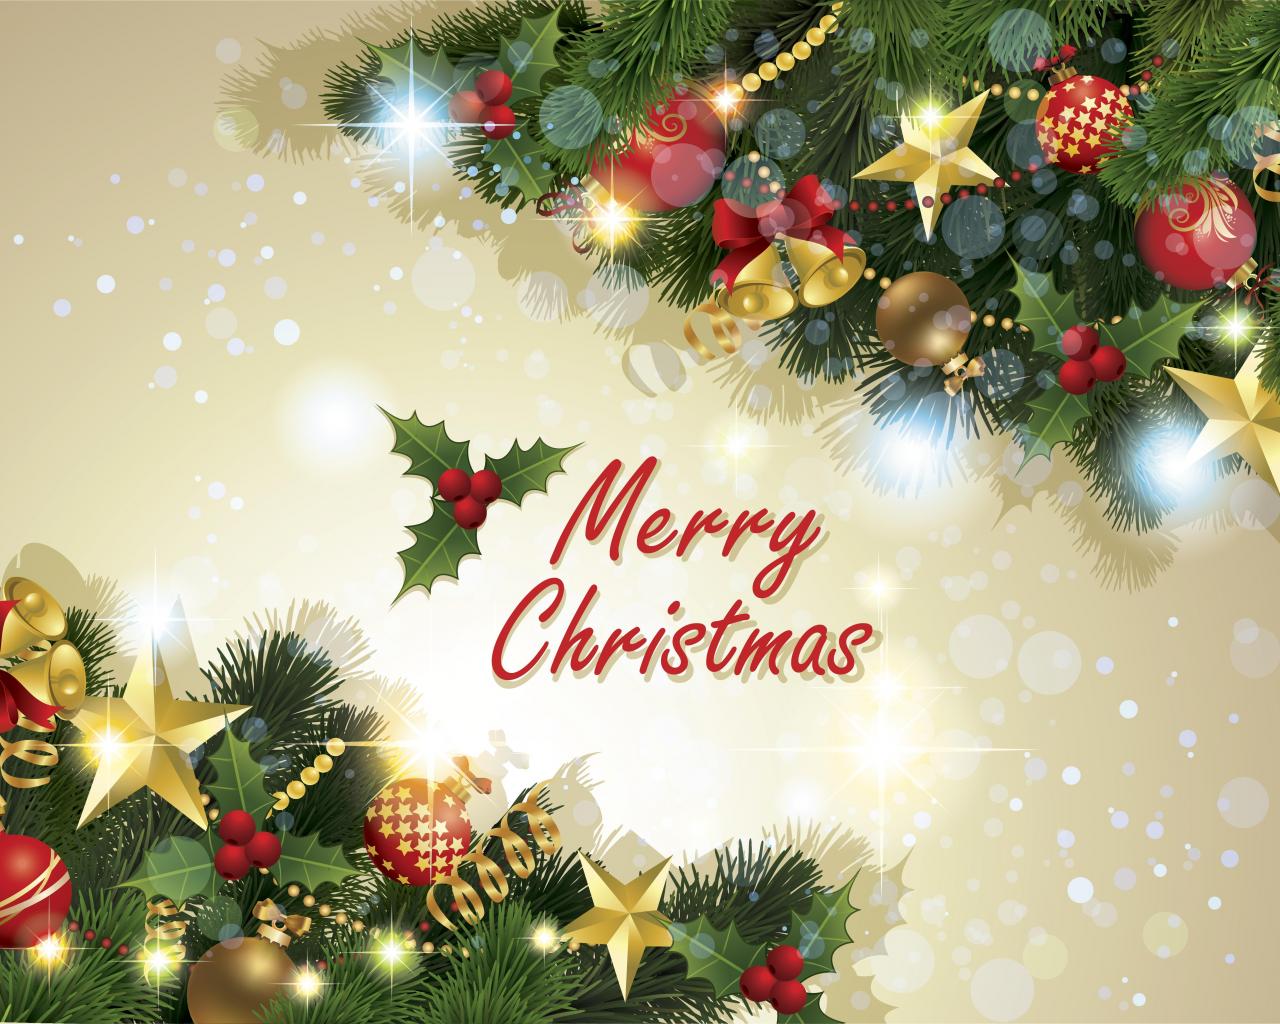 Merry Christmas Images 2019 Free Download , HD Wallpaper & Backgrounds